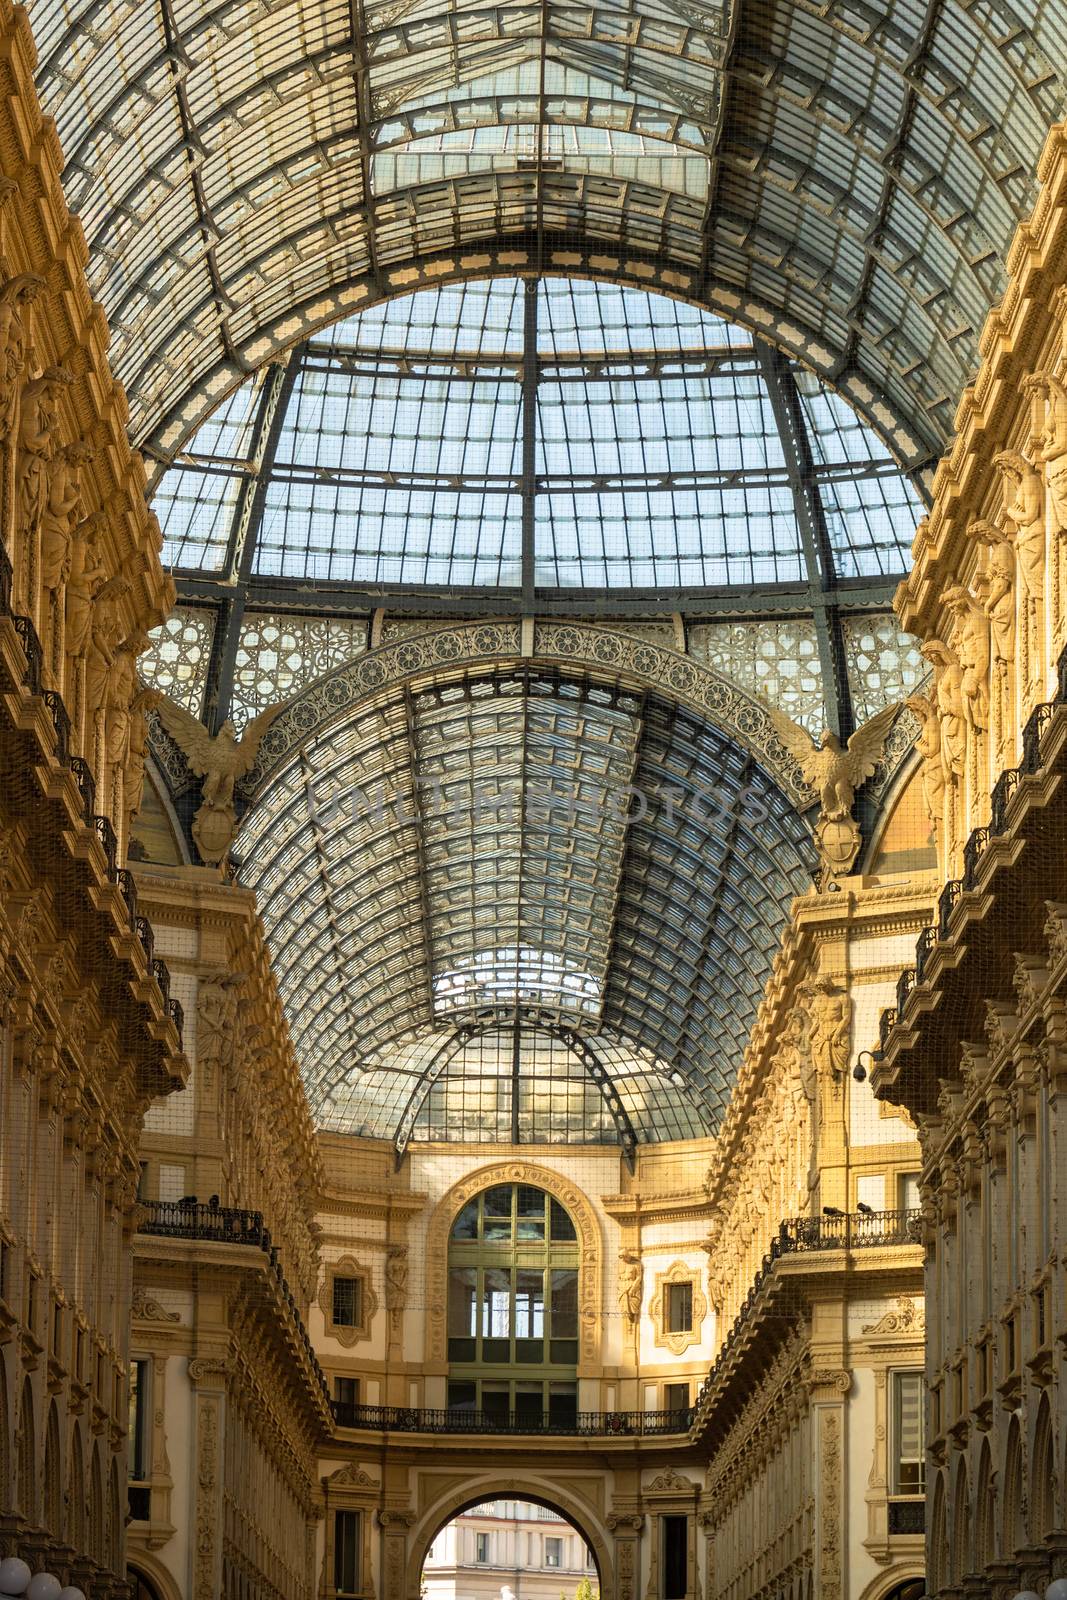 An image of the Gallery Vittorio Emanuele II in Milan Italy